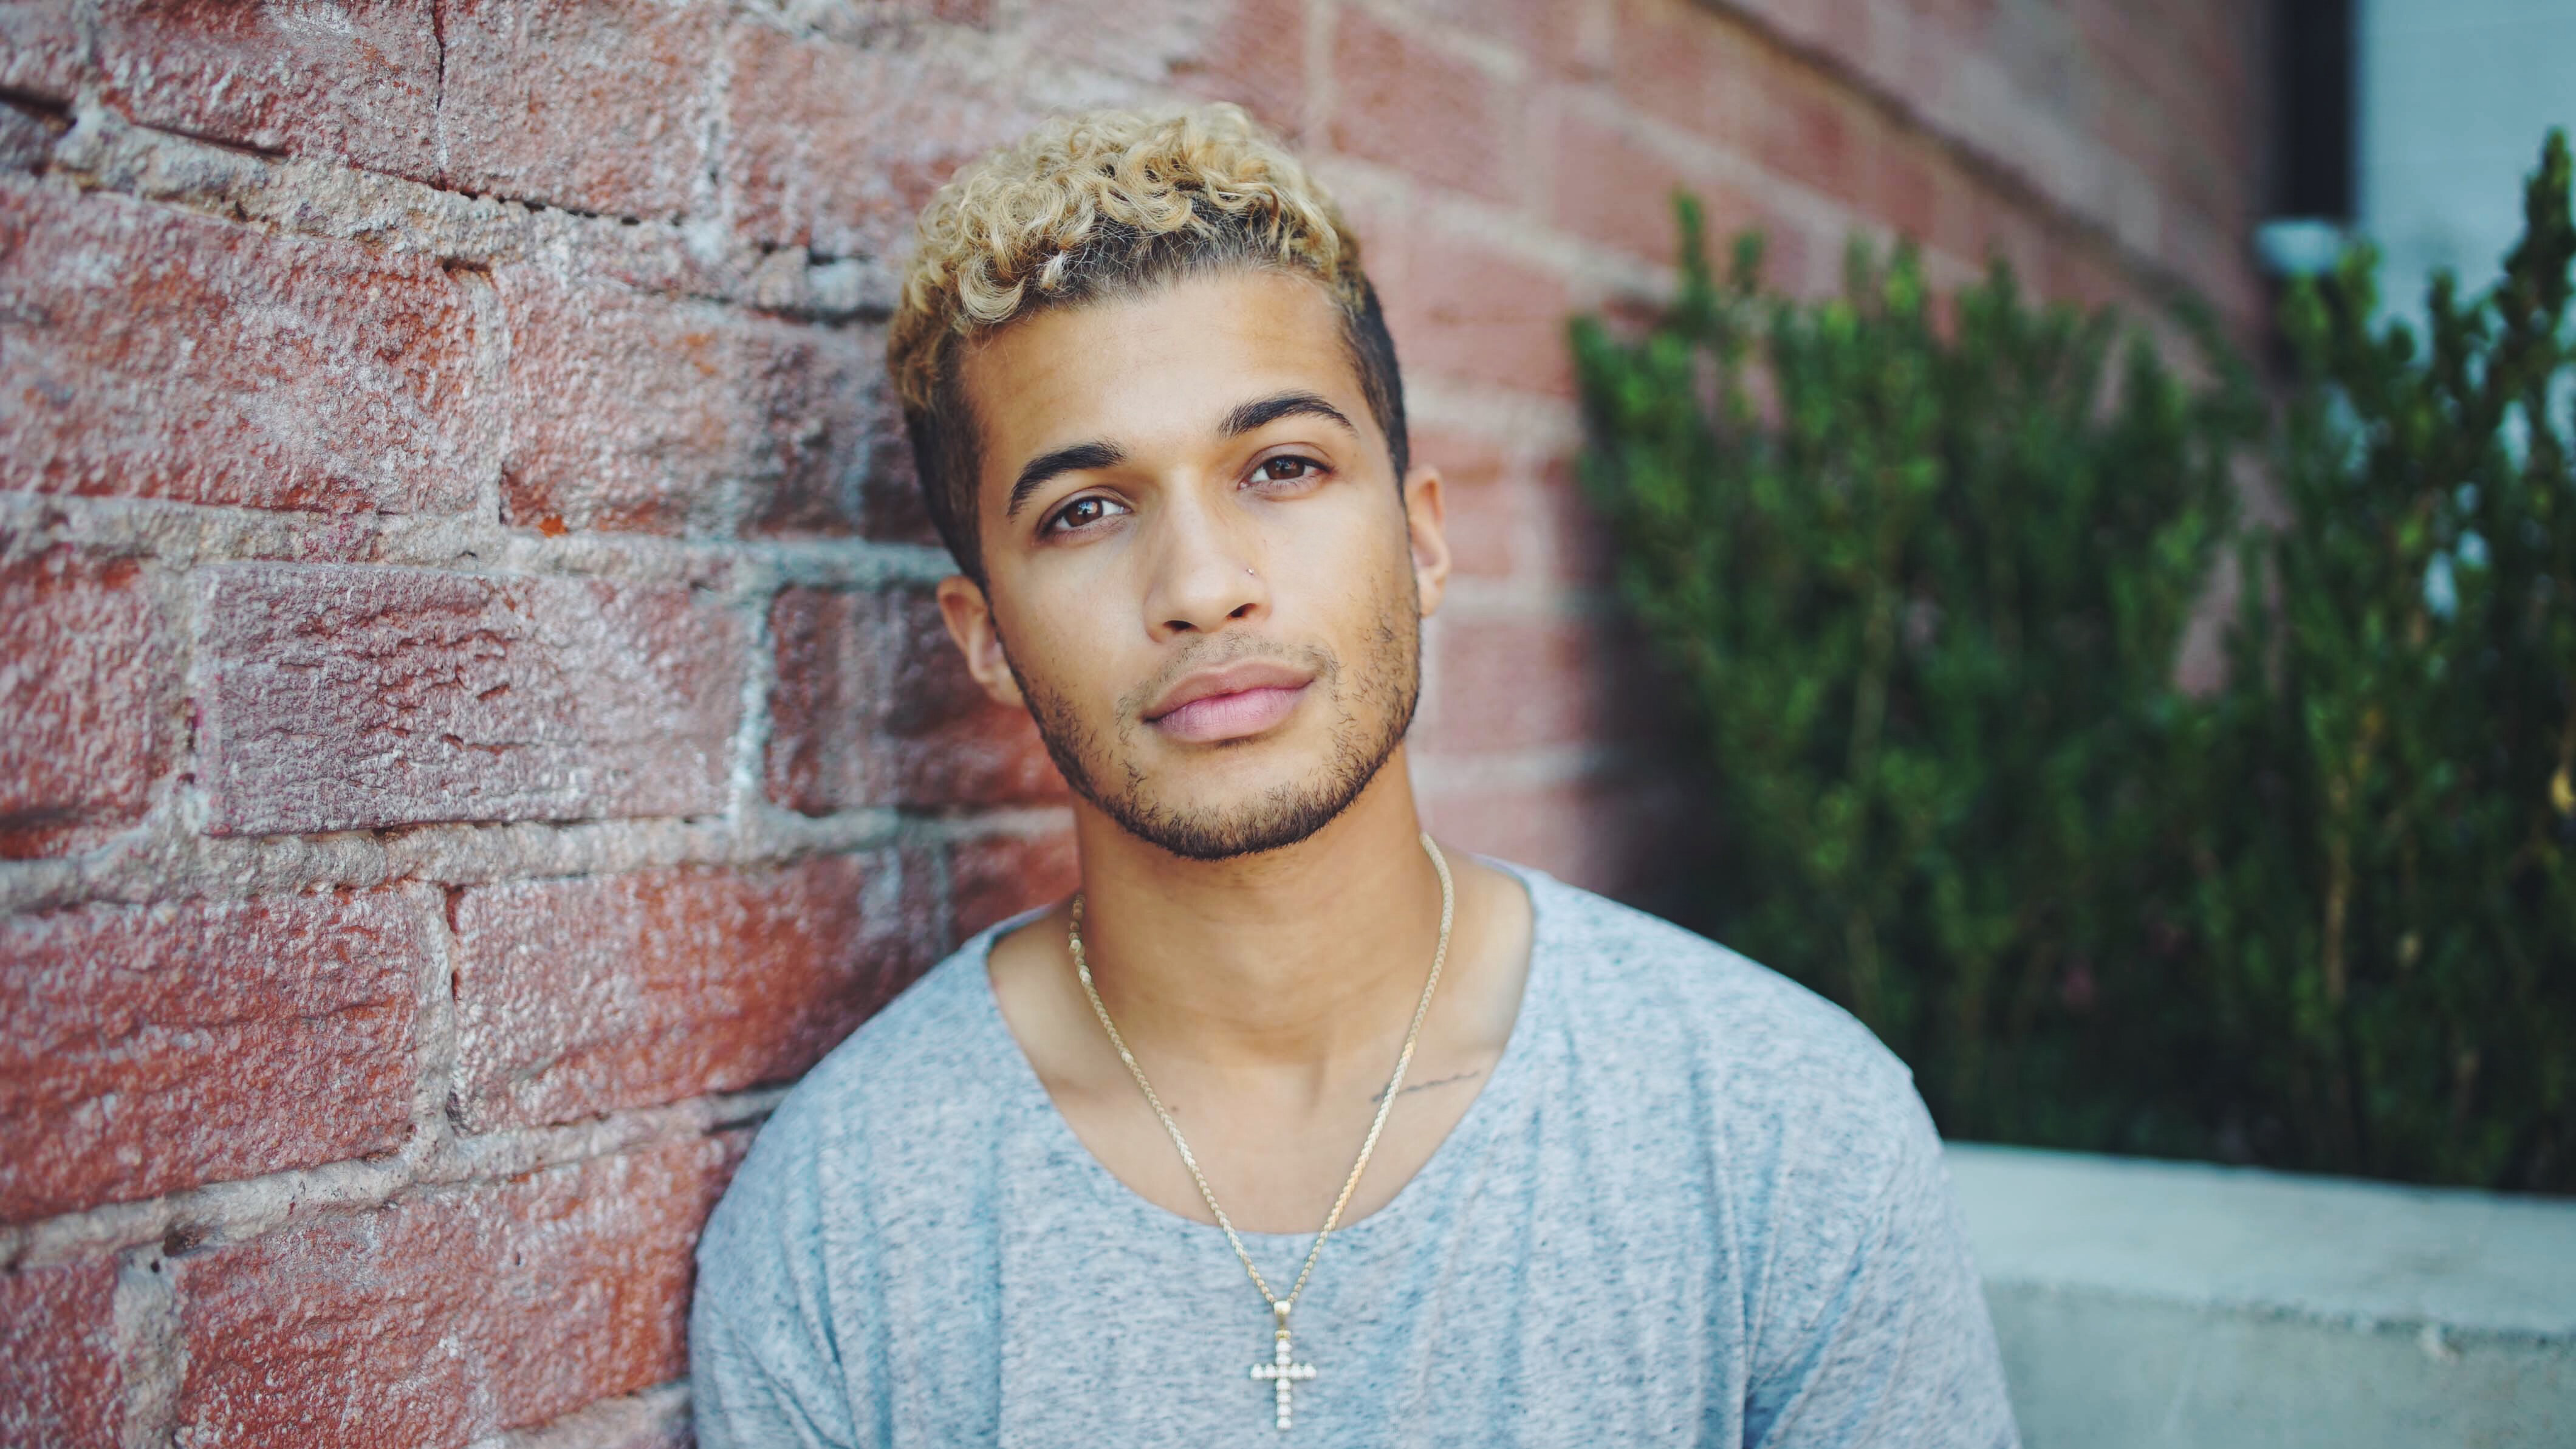 Birmingham's Jordan Fisher part of new 'Dancing With the Stars' cast ...